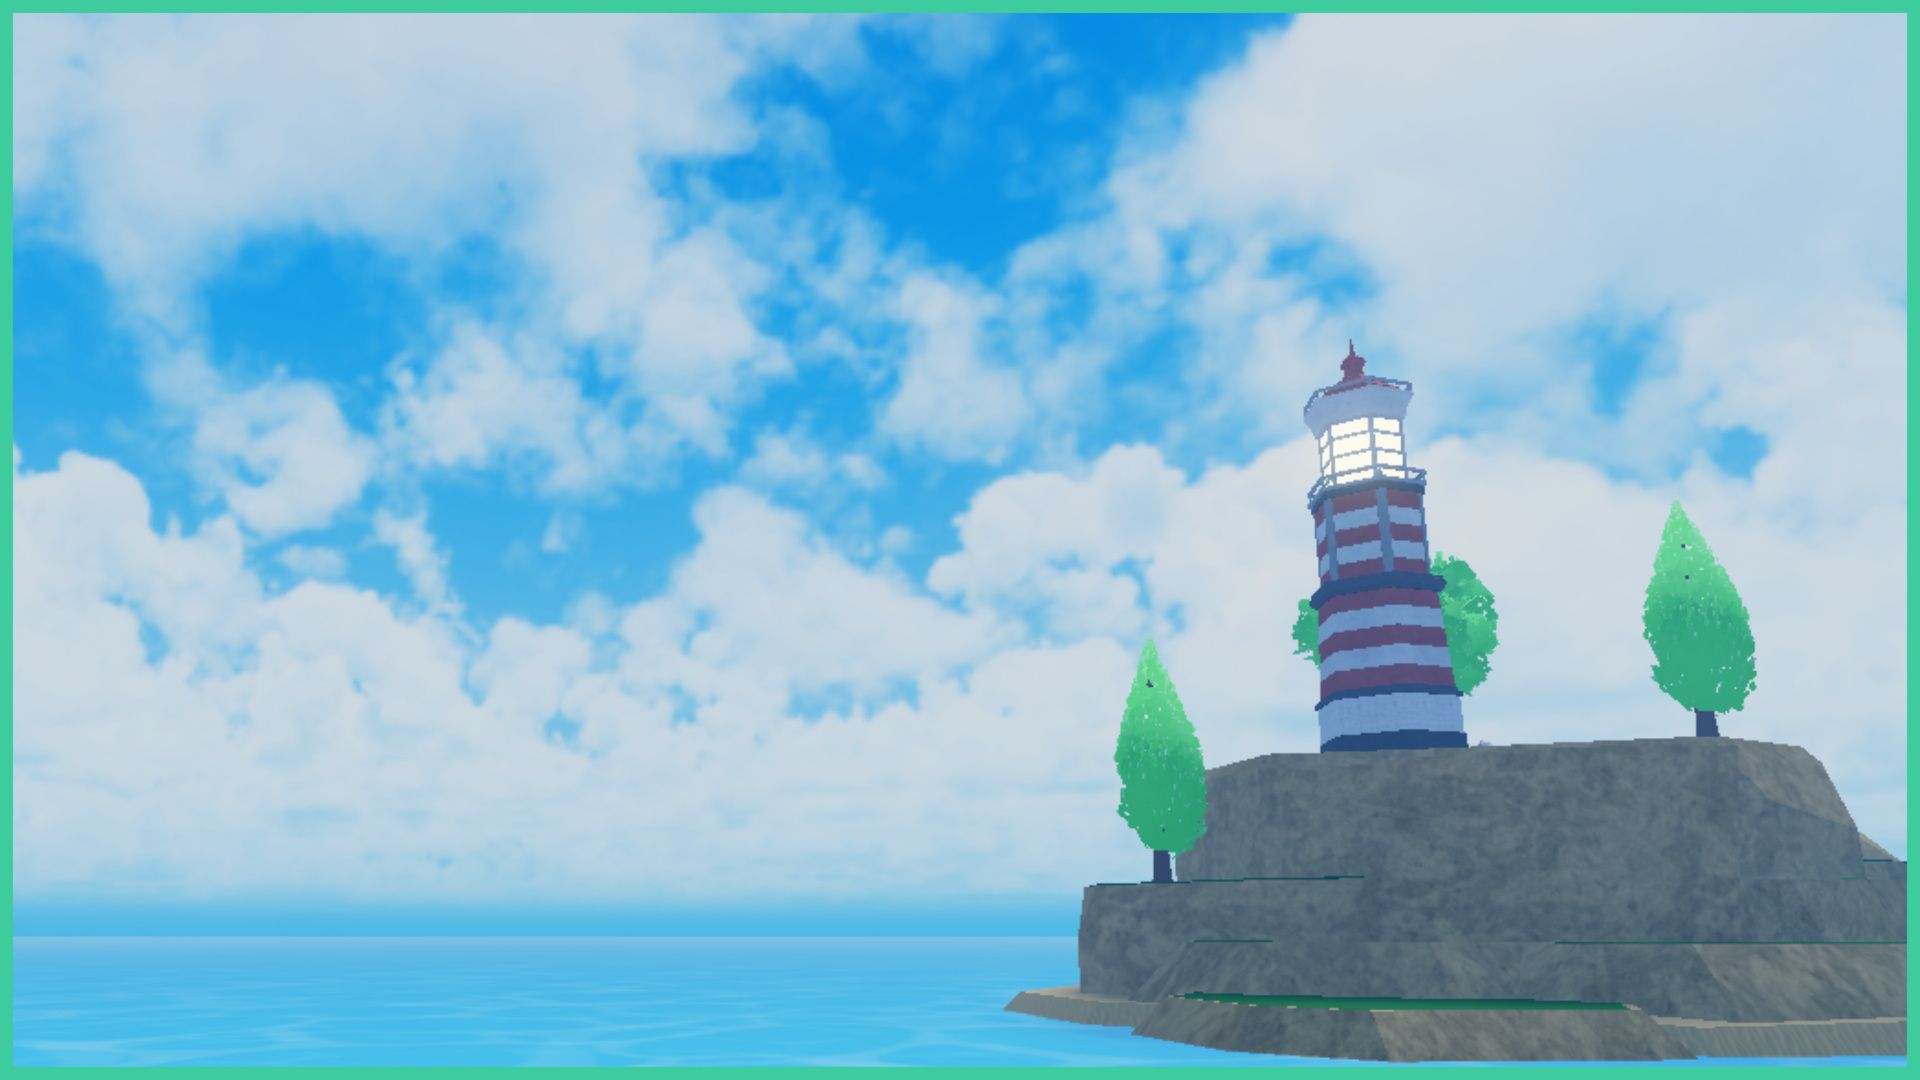 feature image for our cursed sea equipment guide, the image is a screenshot of the light house in the game that is situated on a small rock island in the middle of the ocean as clouds float by in the blue sky, there are also trees on the rocky island on the left of the light house, on the right, and behind it